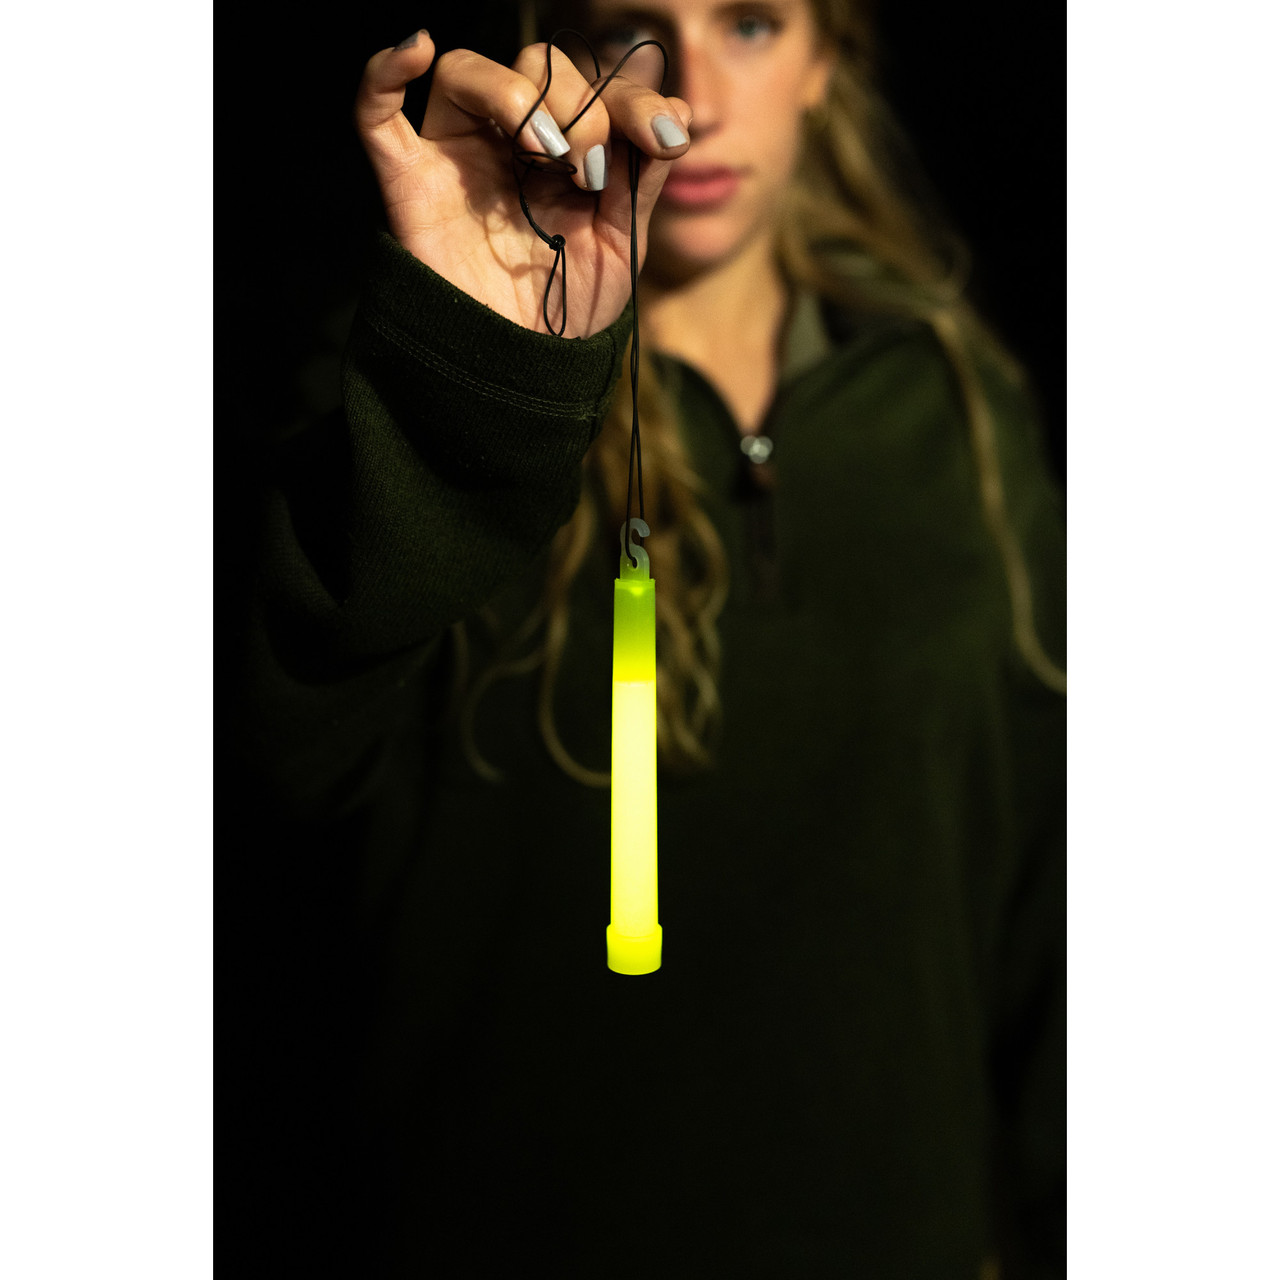 10 Safety Glow Sticks with Marker Stands